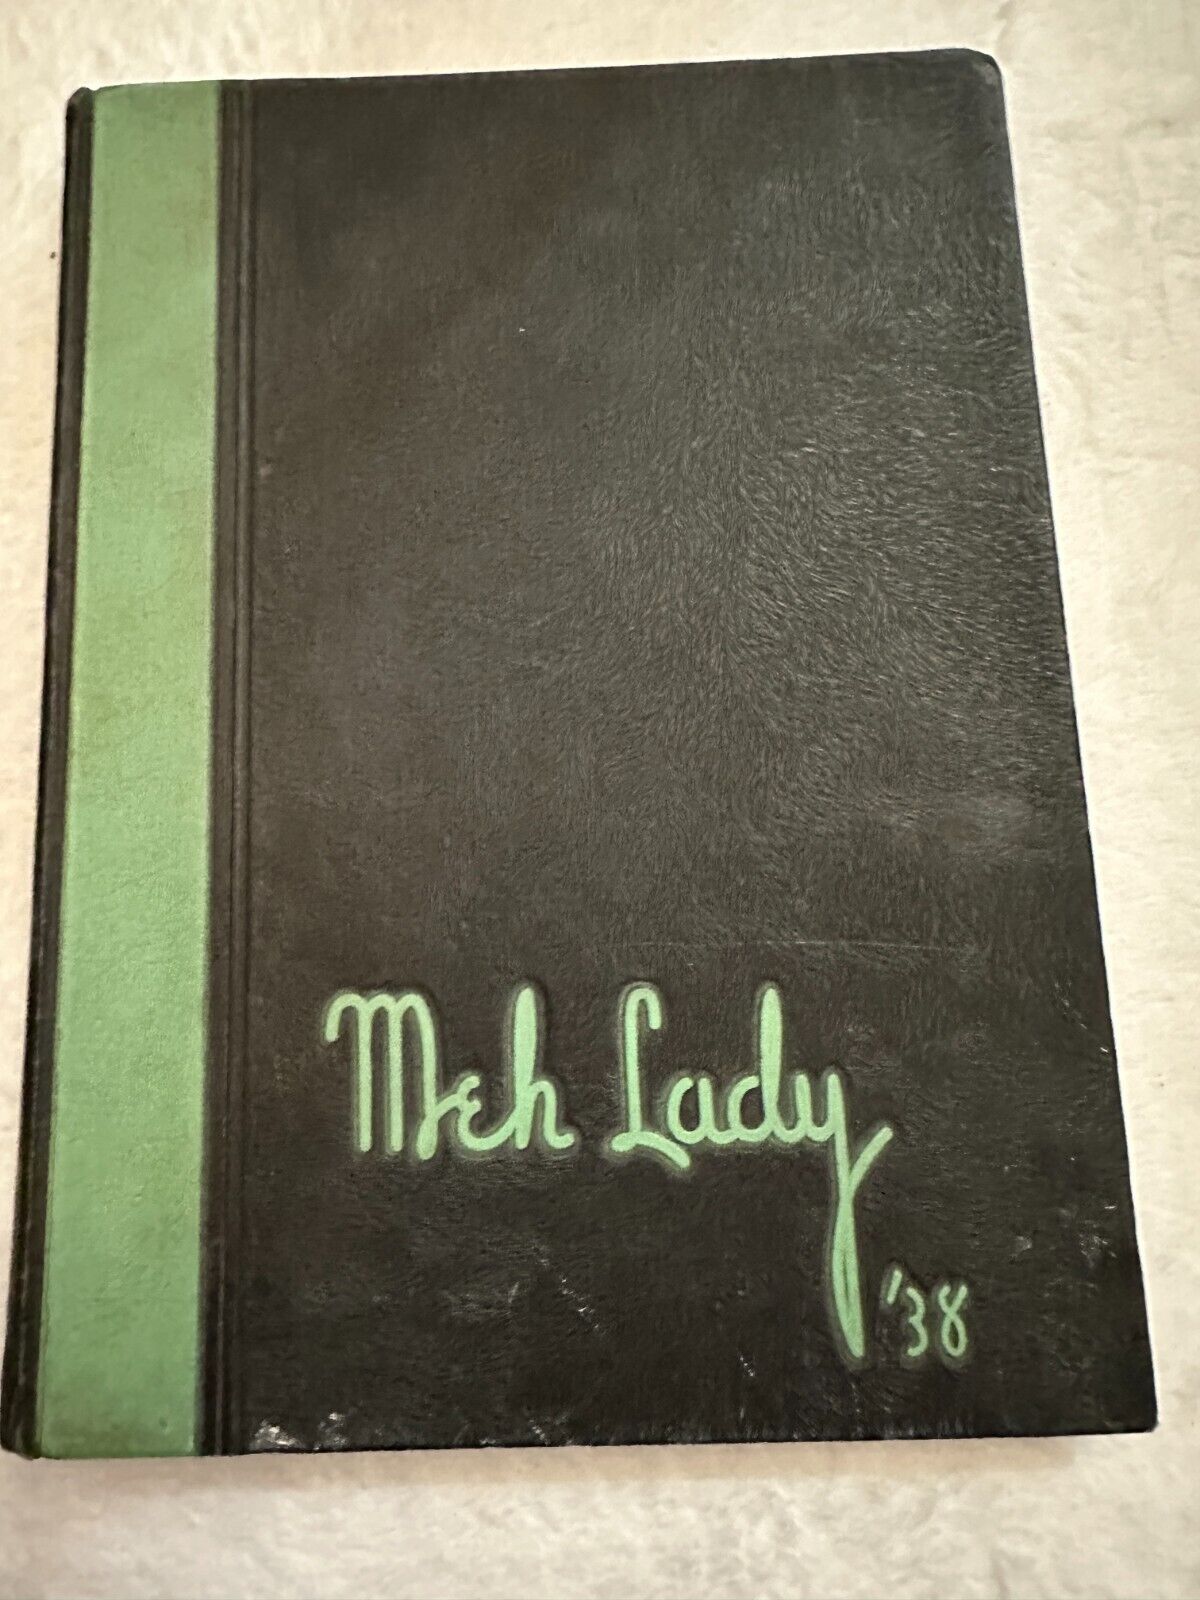 1938 Meh Lady Yearbook - Mississippi State College for Women - MSCW